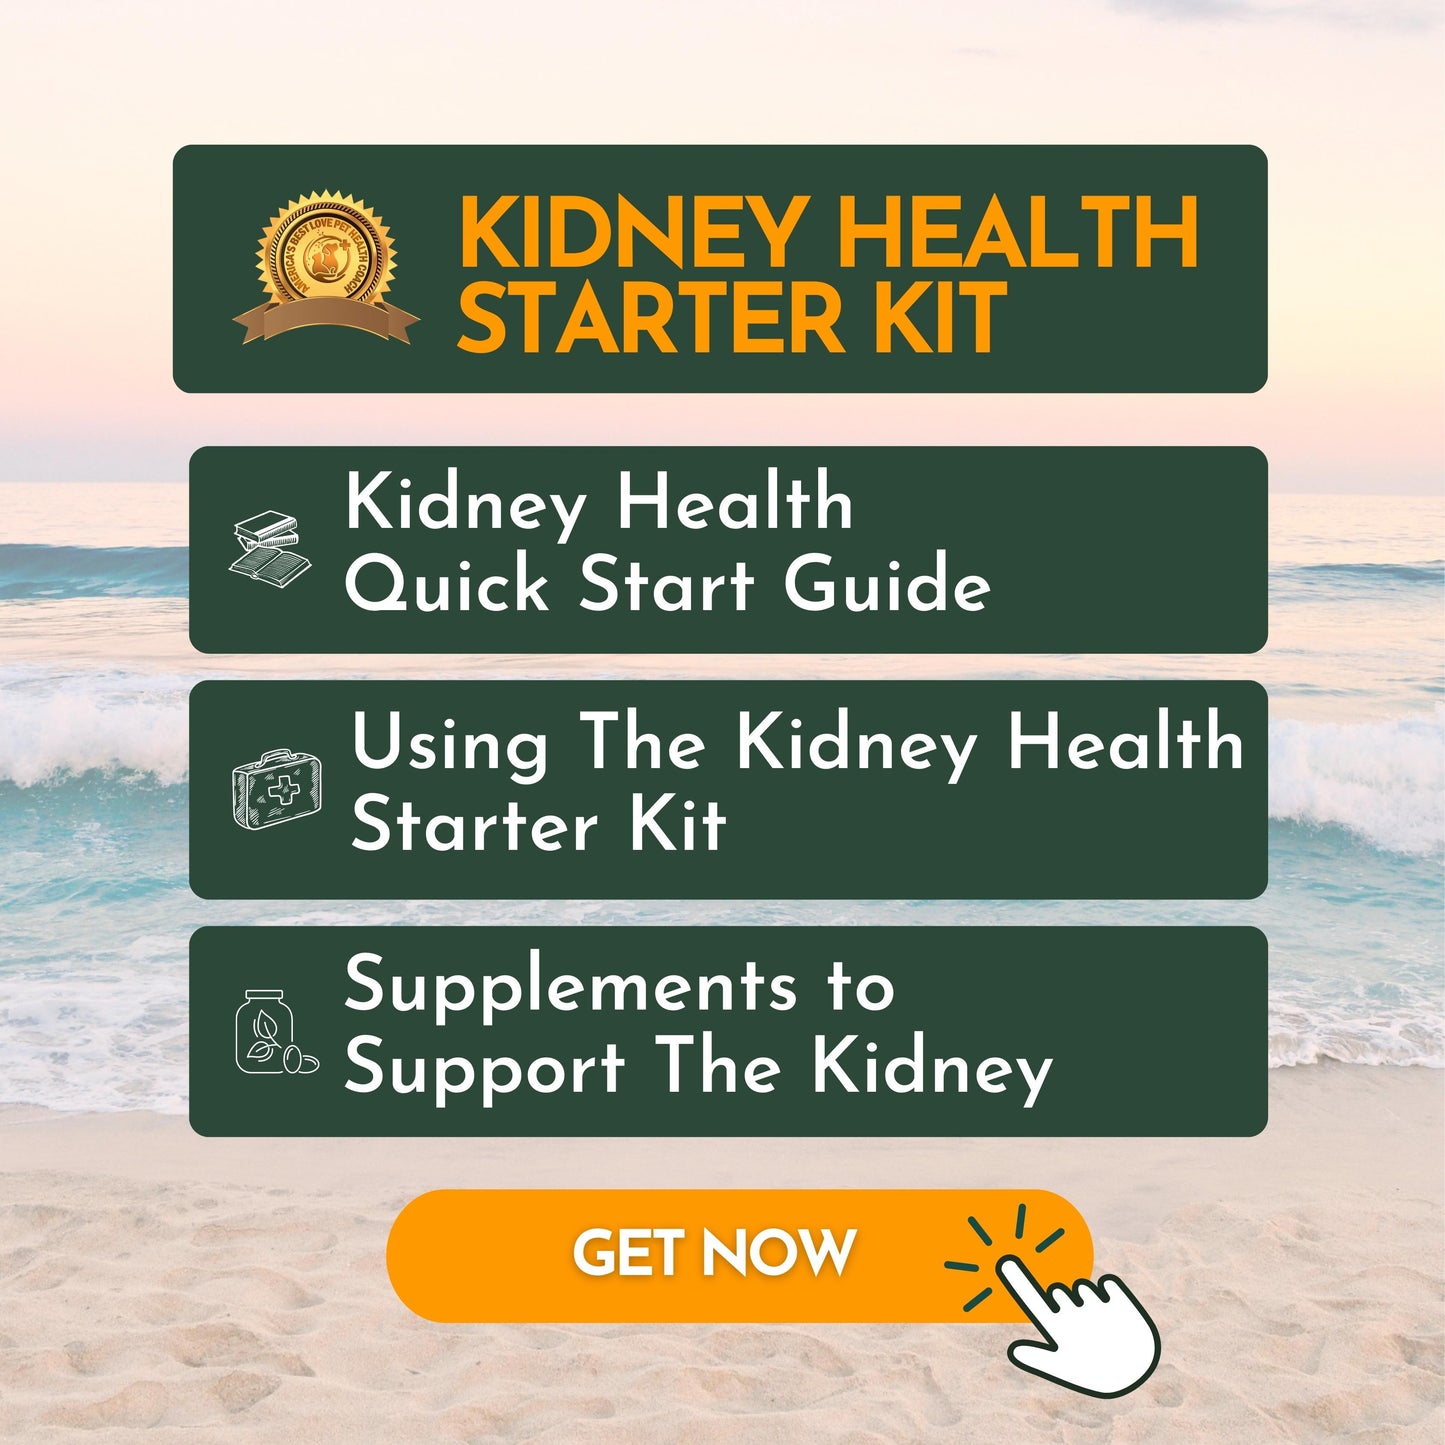 Kidney Health Starter Kit Course For Dogs and Cats